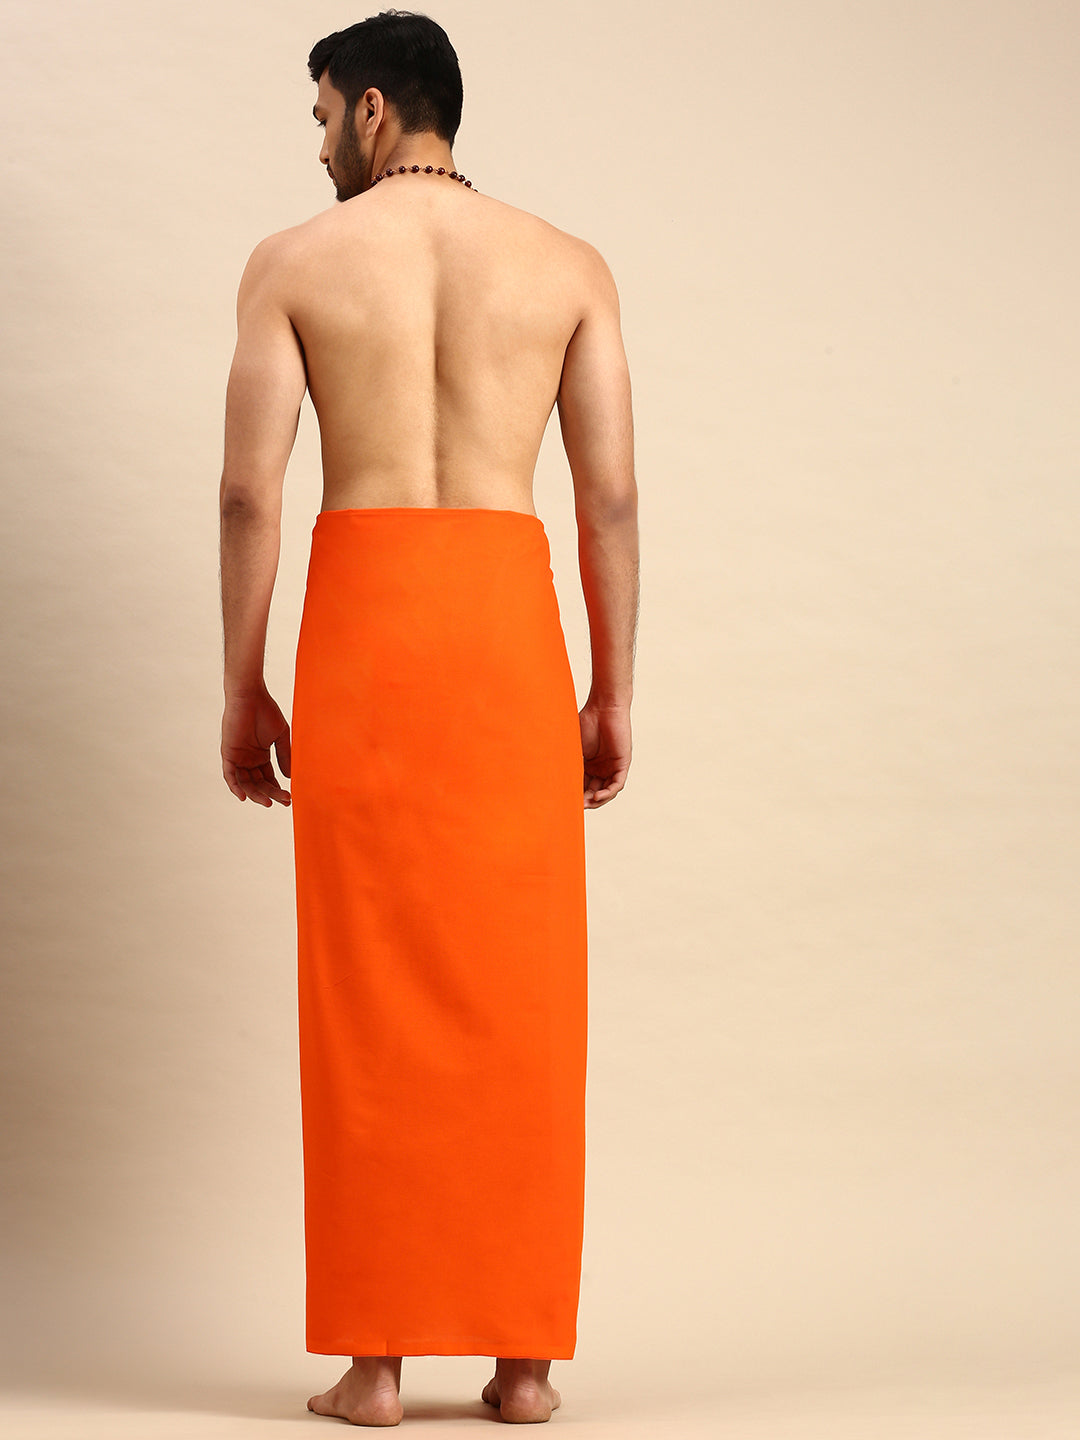 Mens Color Dhoti with Small Border Golden Orange-Back view